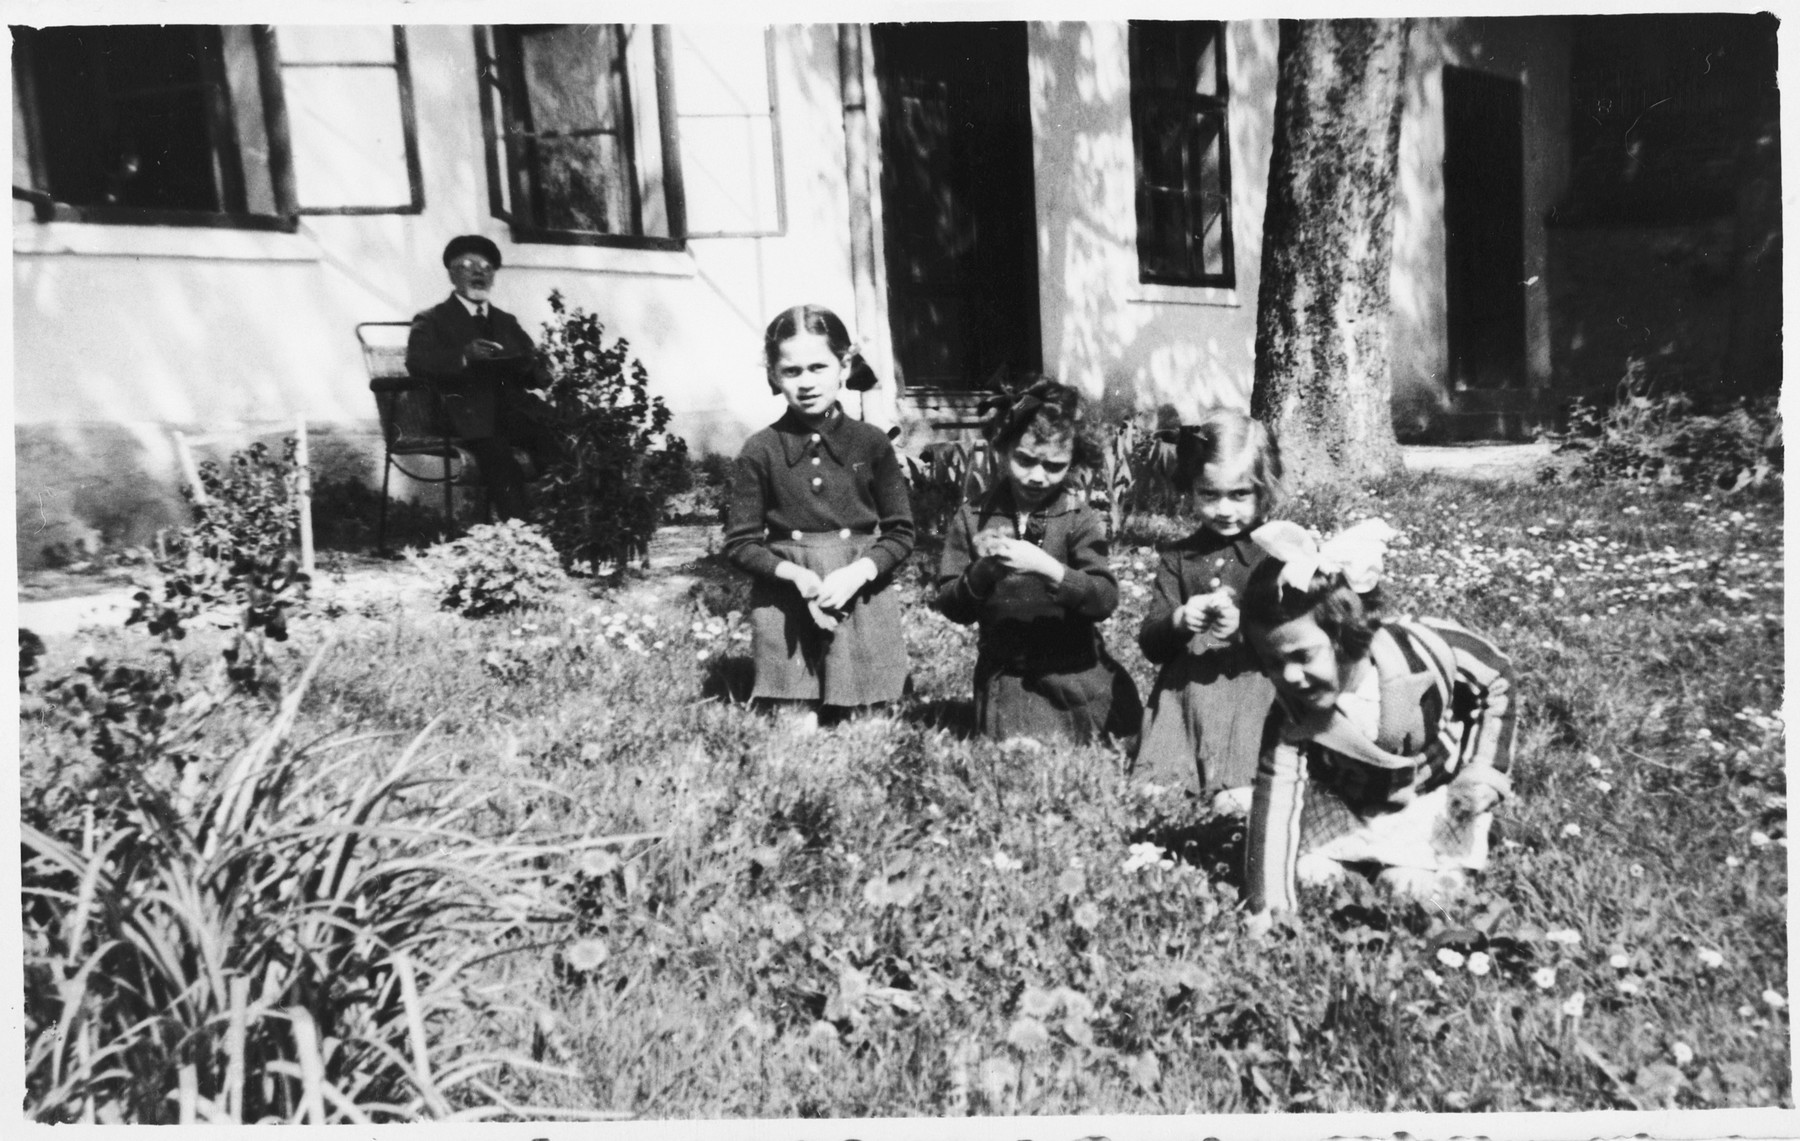 Four young Jewish girls play in the garden while their grandfather looks on.

Pictured are Zdenka and Vera Apler and Edita Deutsch.  In the background is Rabbi Leopold Deutsch.  He is seated in front of a building that served both as the Deutsch home and the local synagogue.